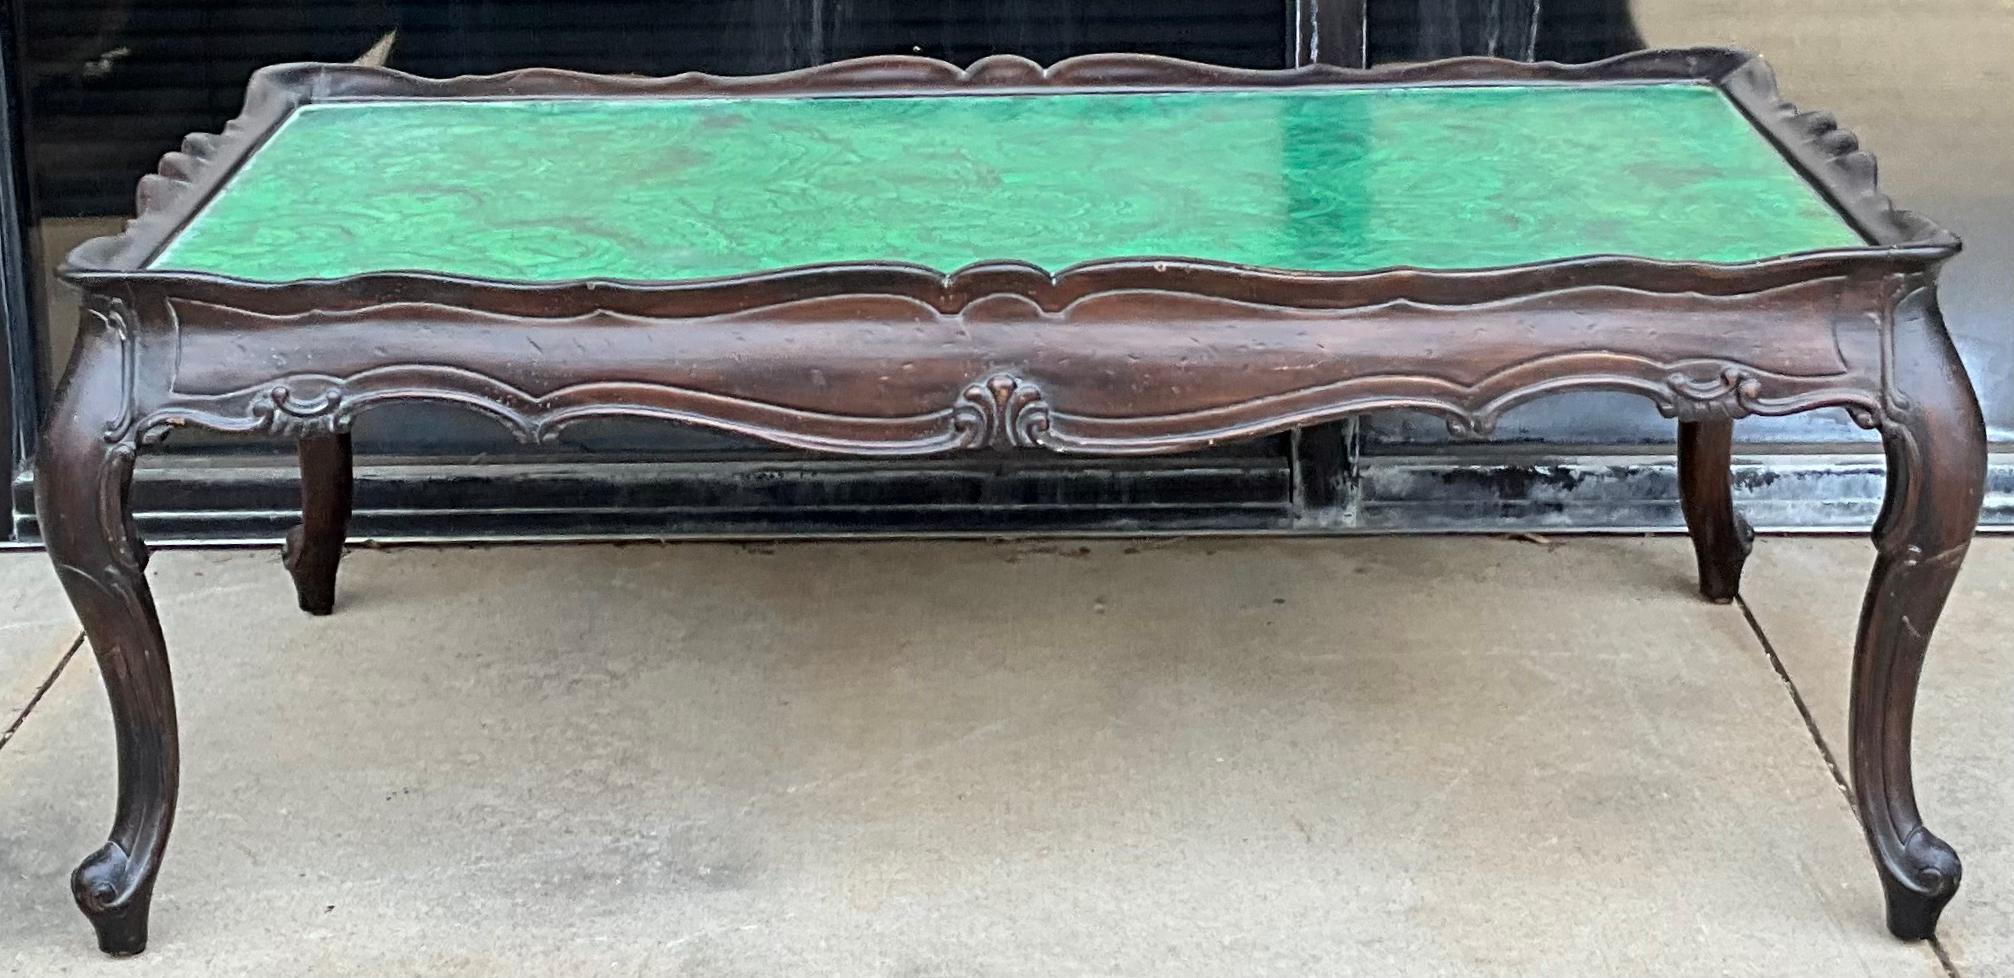 This is a Hollywood Regency era carved Italian faux malachite painted coffee table. The base is heavily carved with an almost ebonized or espresso like finish. The painted faux malachite top speaks for itself!

My shipping is for the Continental US